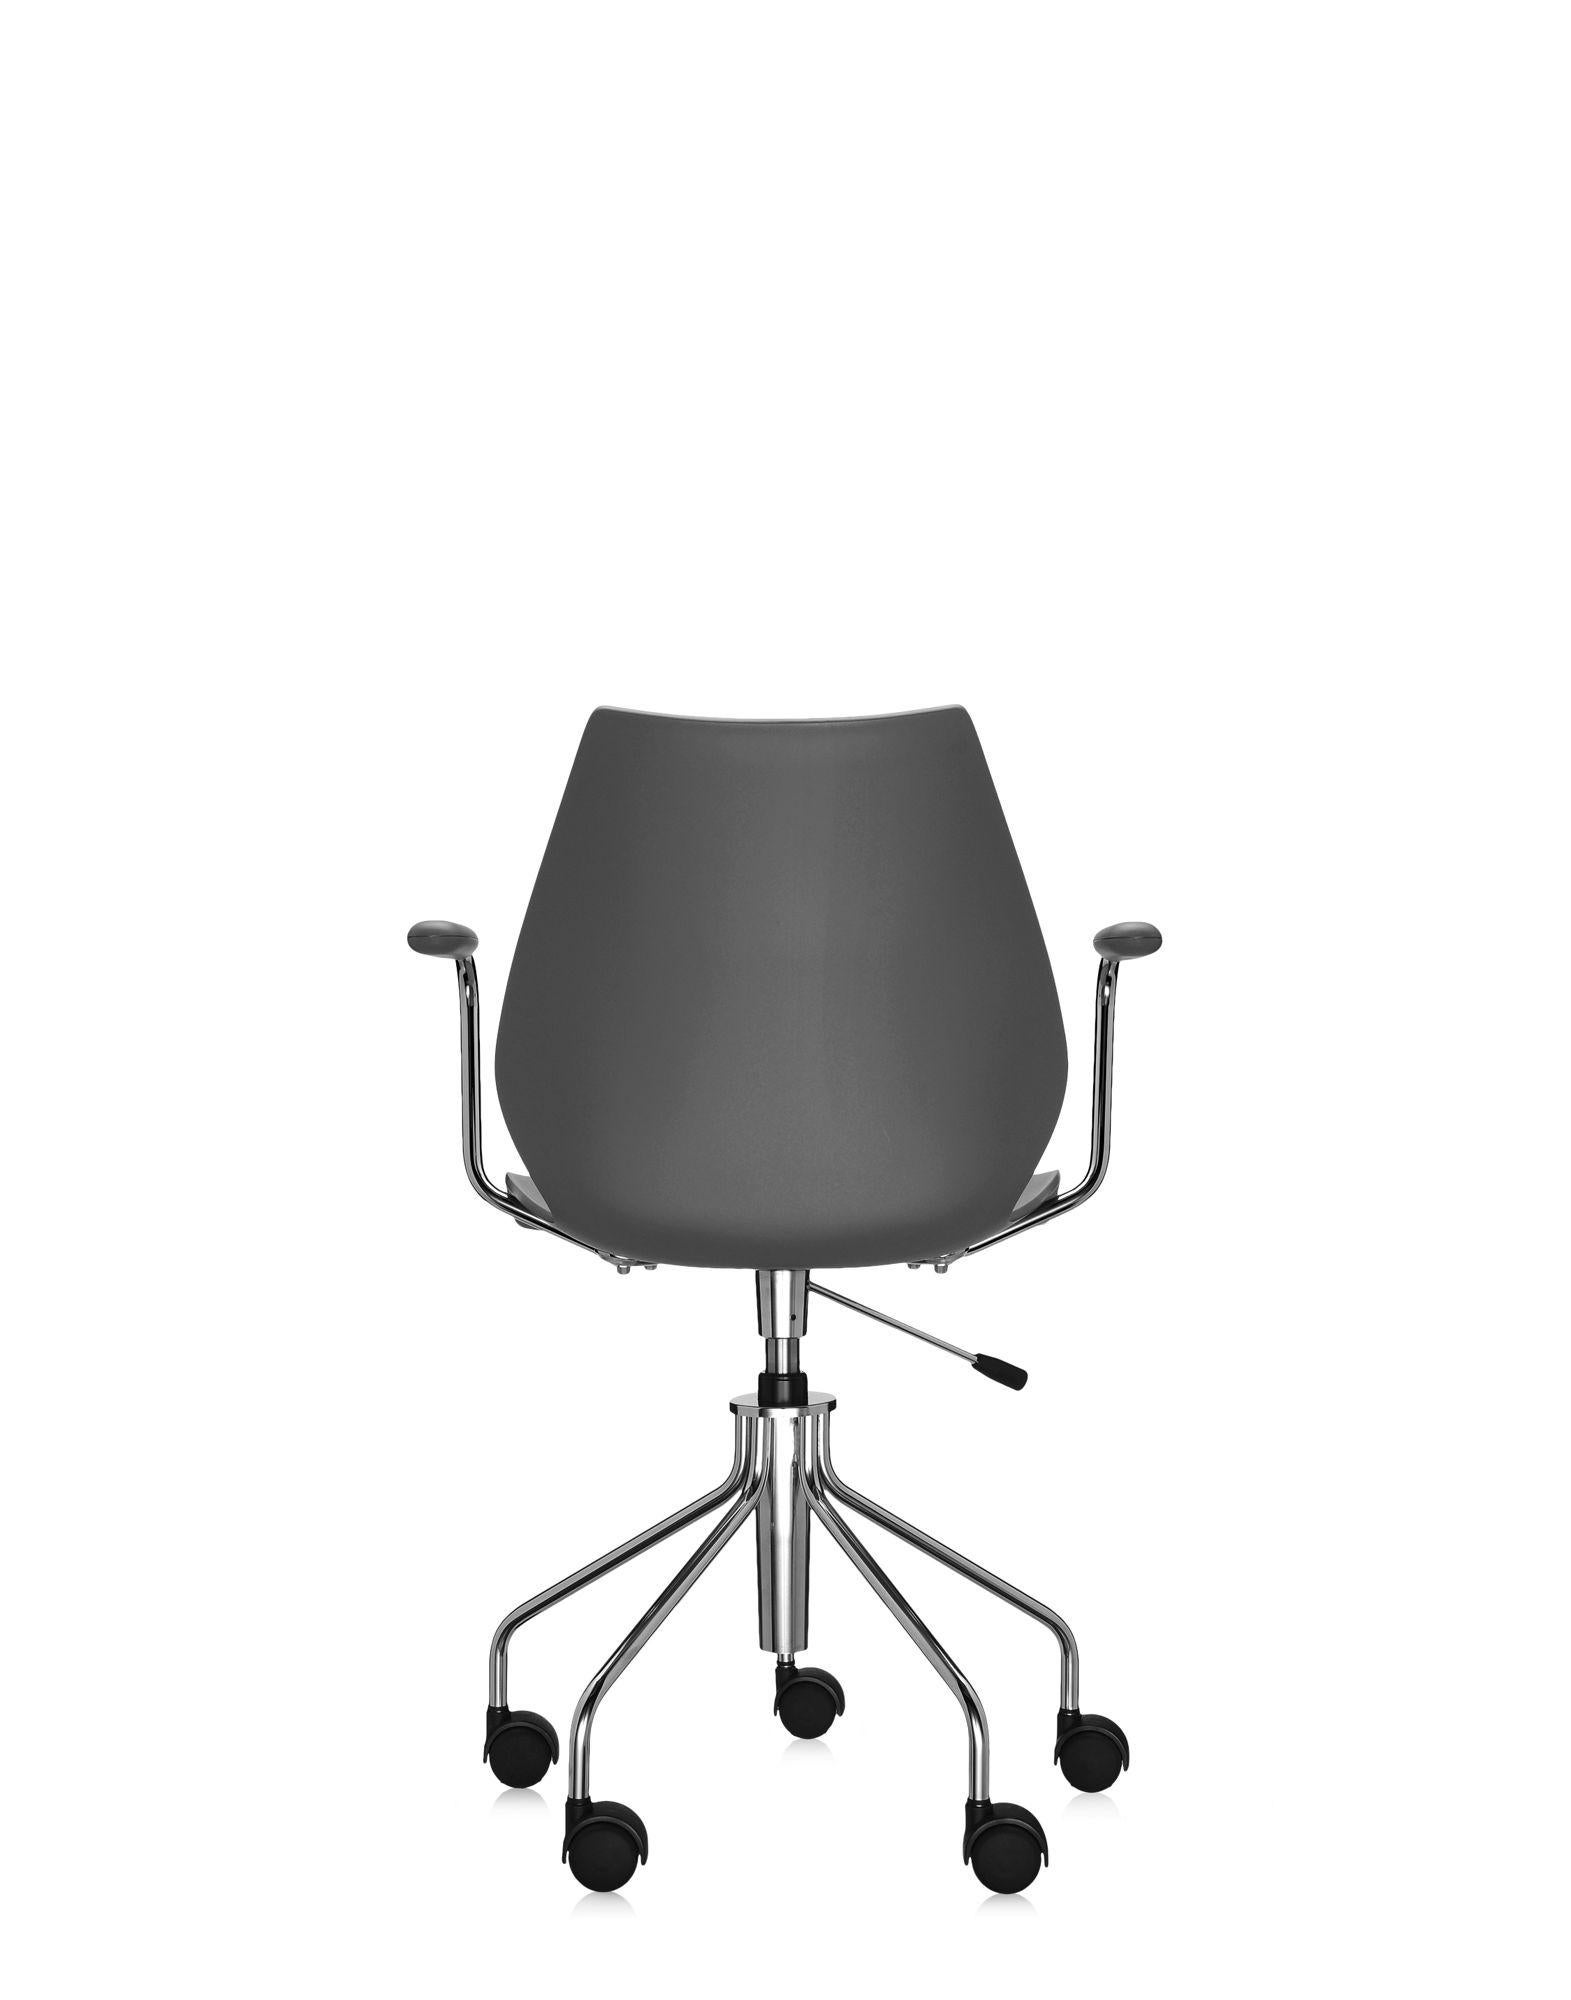 Contemporary Kartell Maui Swivel Chair Adjustable in Anthracite by Vico Magistretti For Sale